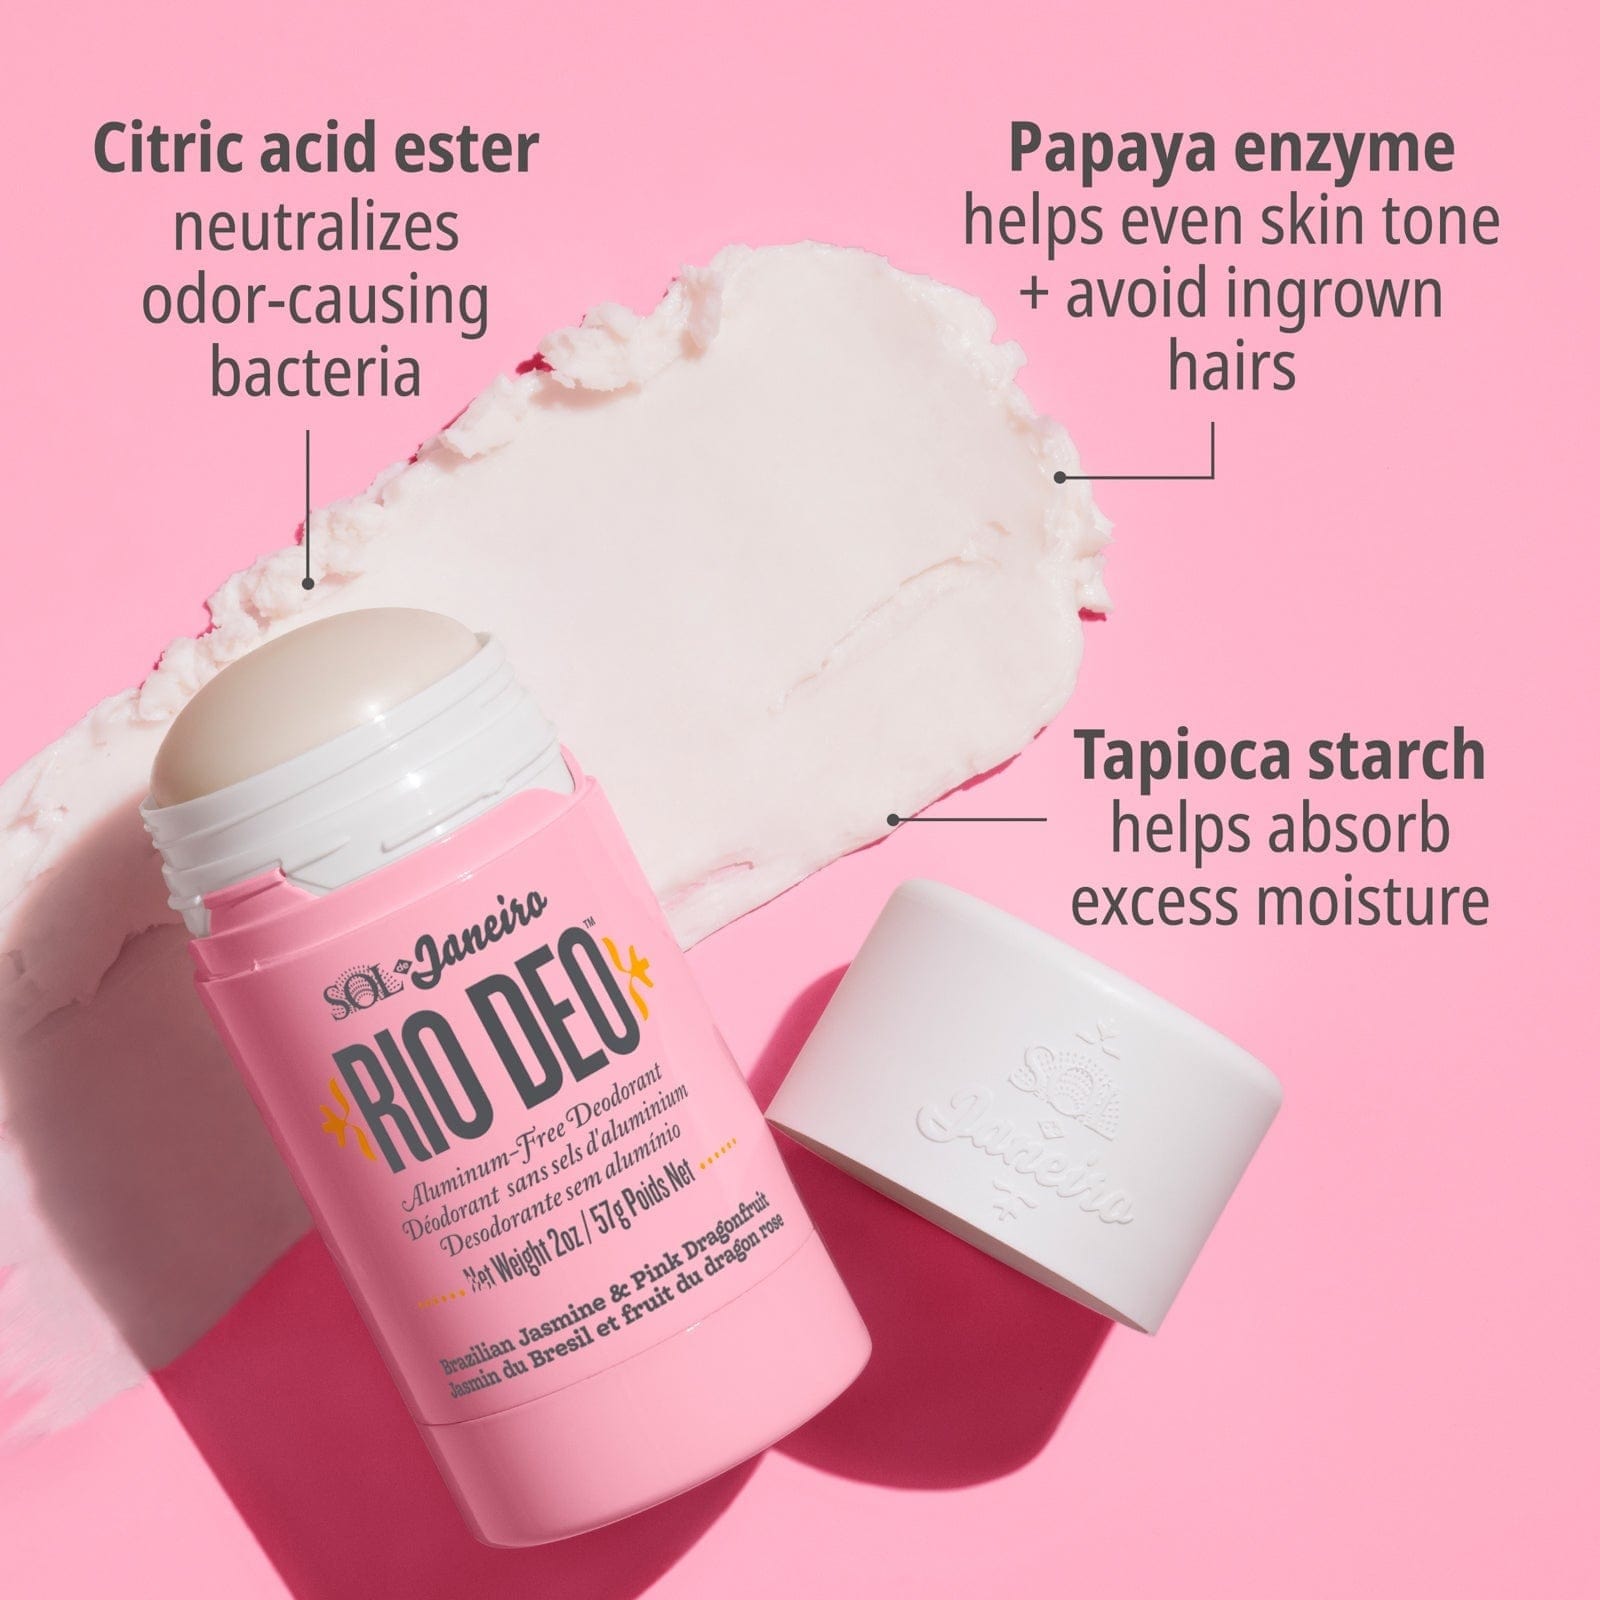 Citric acid ester neutralizes odor-causing bacteria, papaya enzyme helps even skin tone + avoid ingrown hairs, tapioca starch helps absorb excess moisture